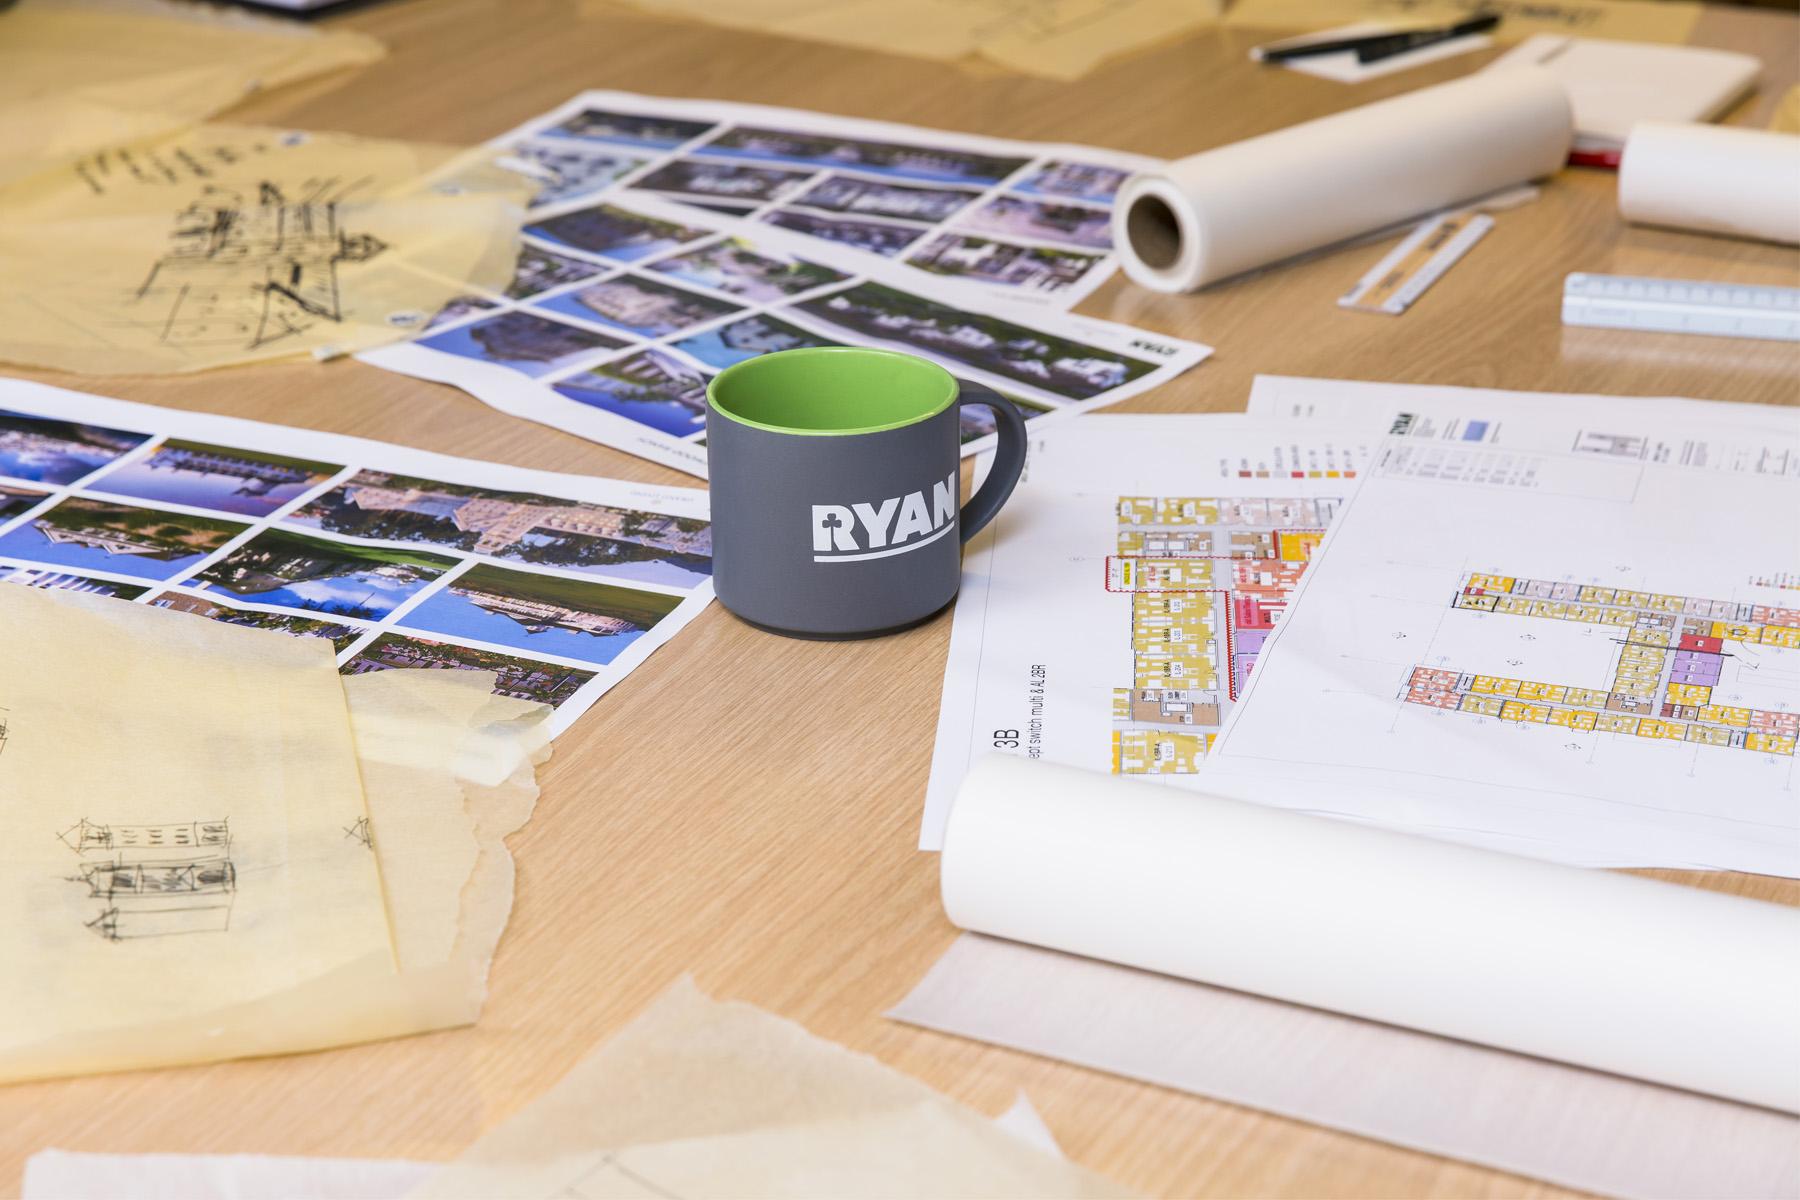 A desk with floor plans, photos of projects and a Ryan coffee mug represents the growth Ryan Companies is experiencing. 